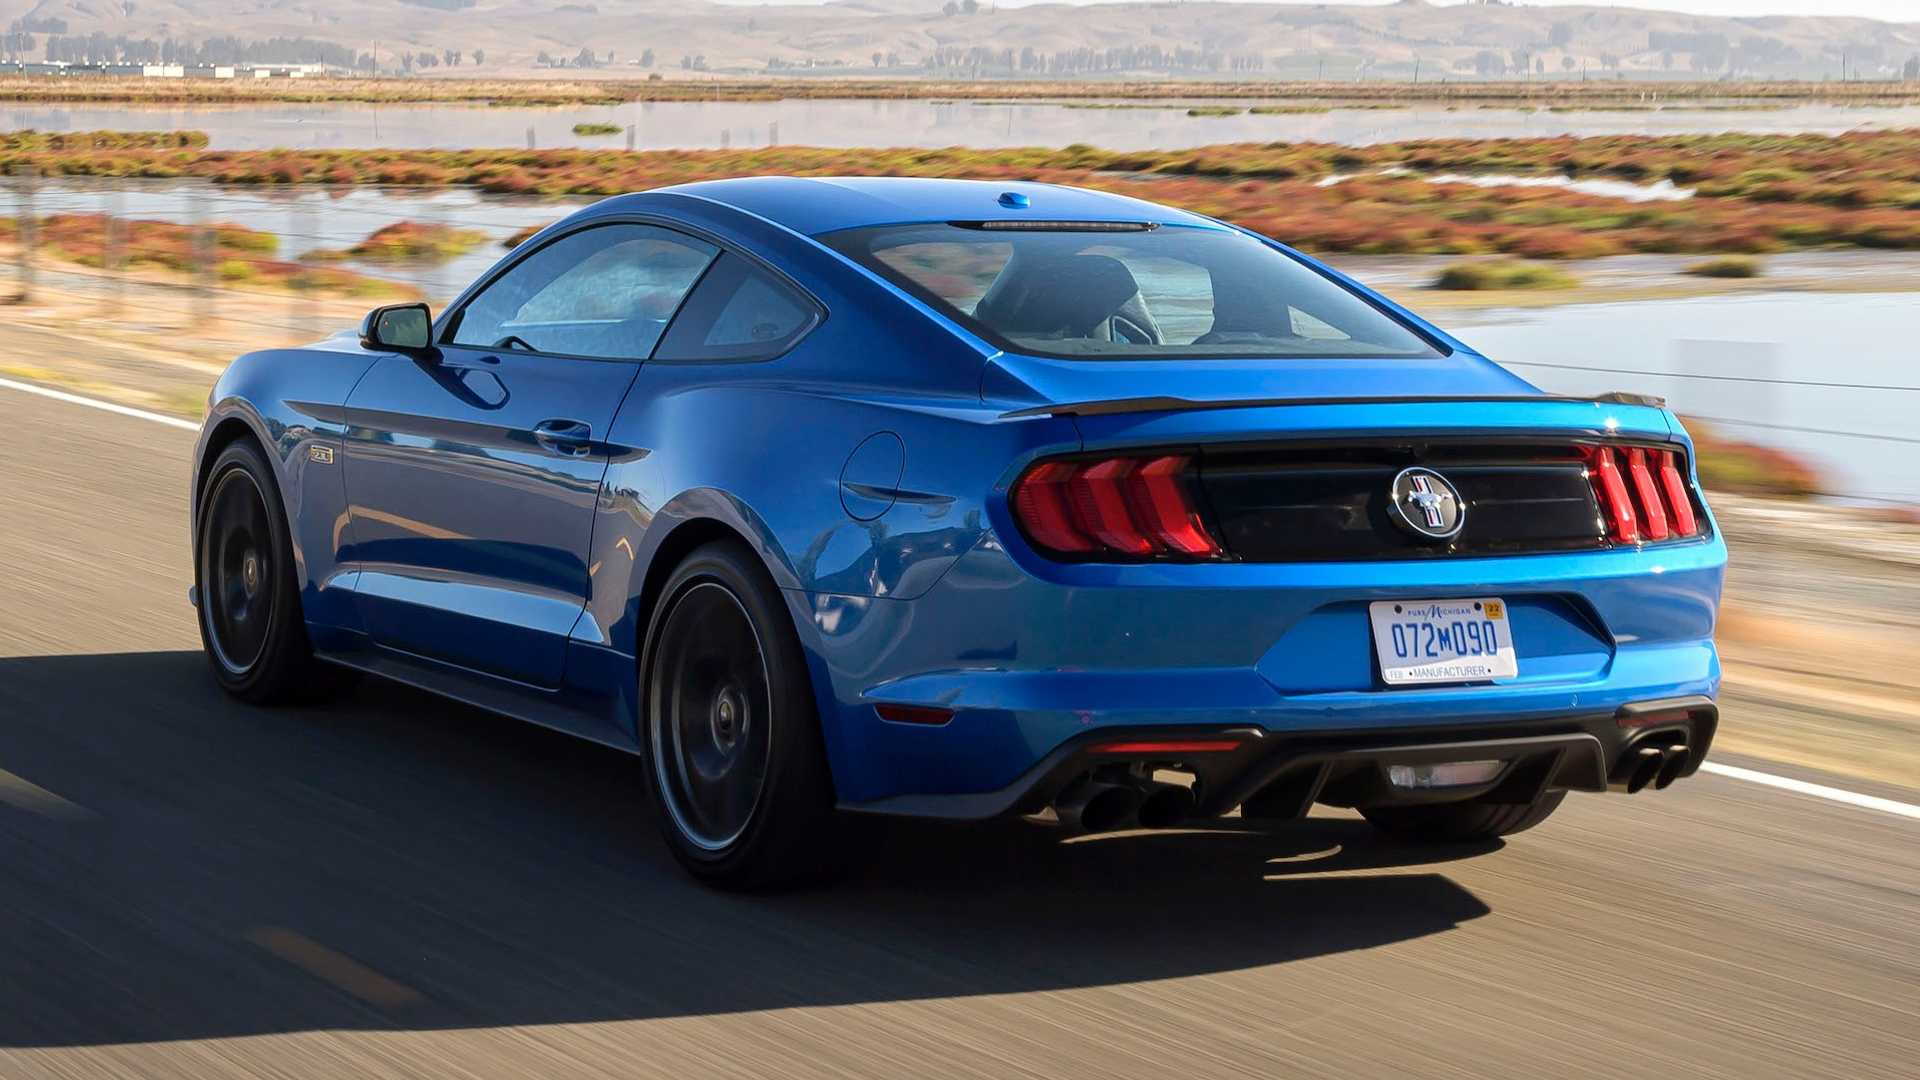 2020 EcoBoost Mustang is a High-Performance Potent Four Banger ...